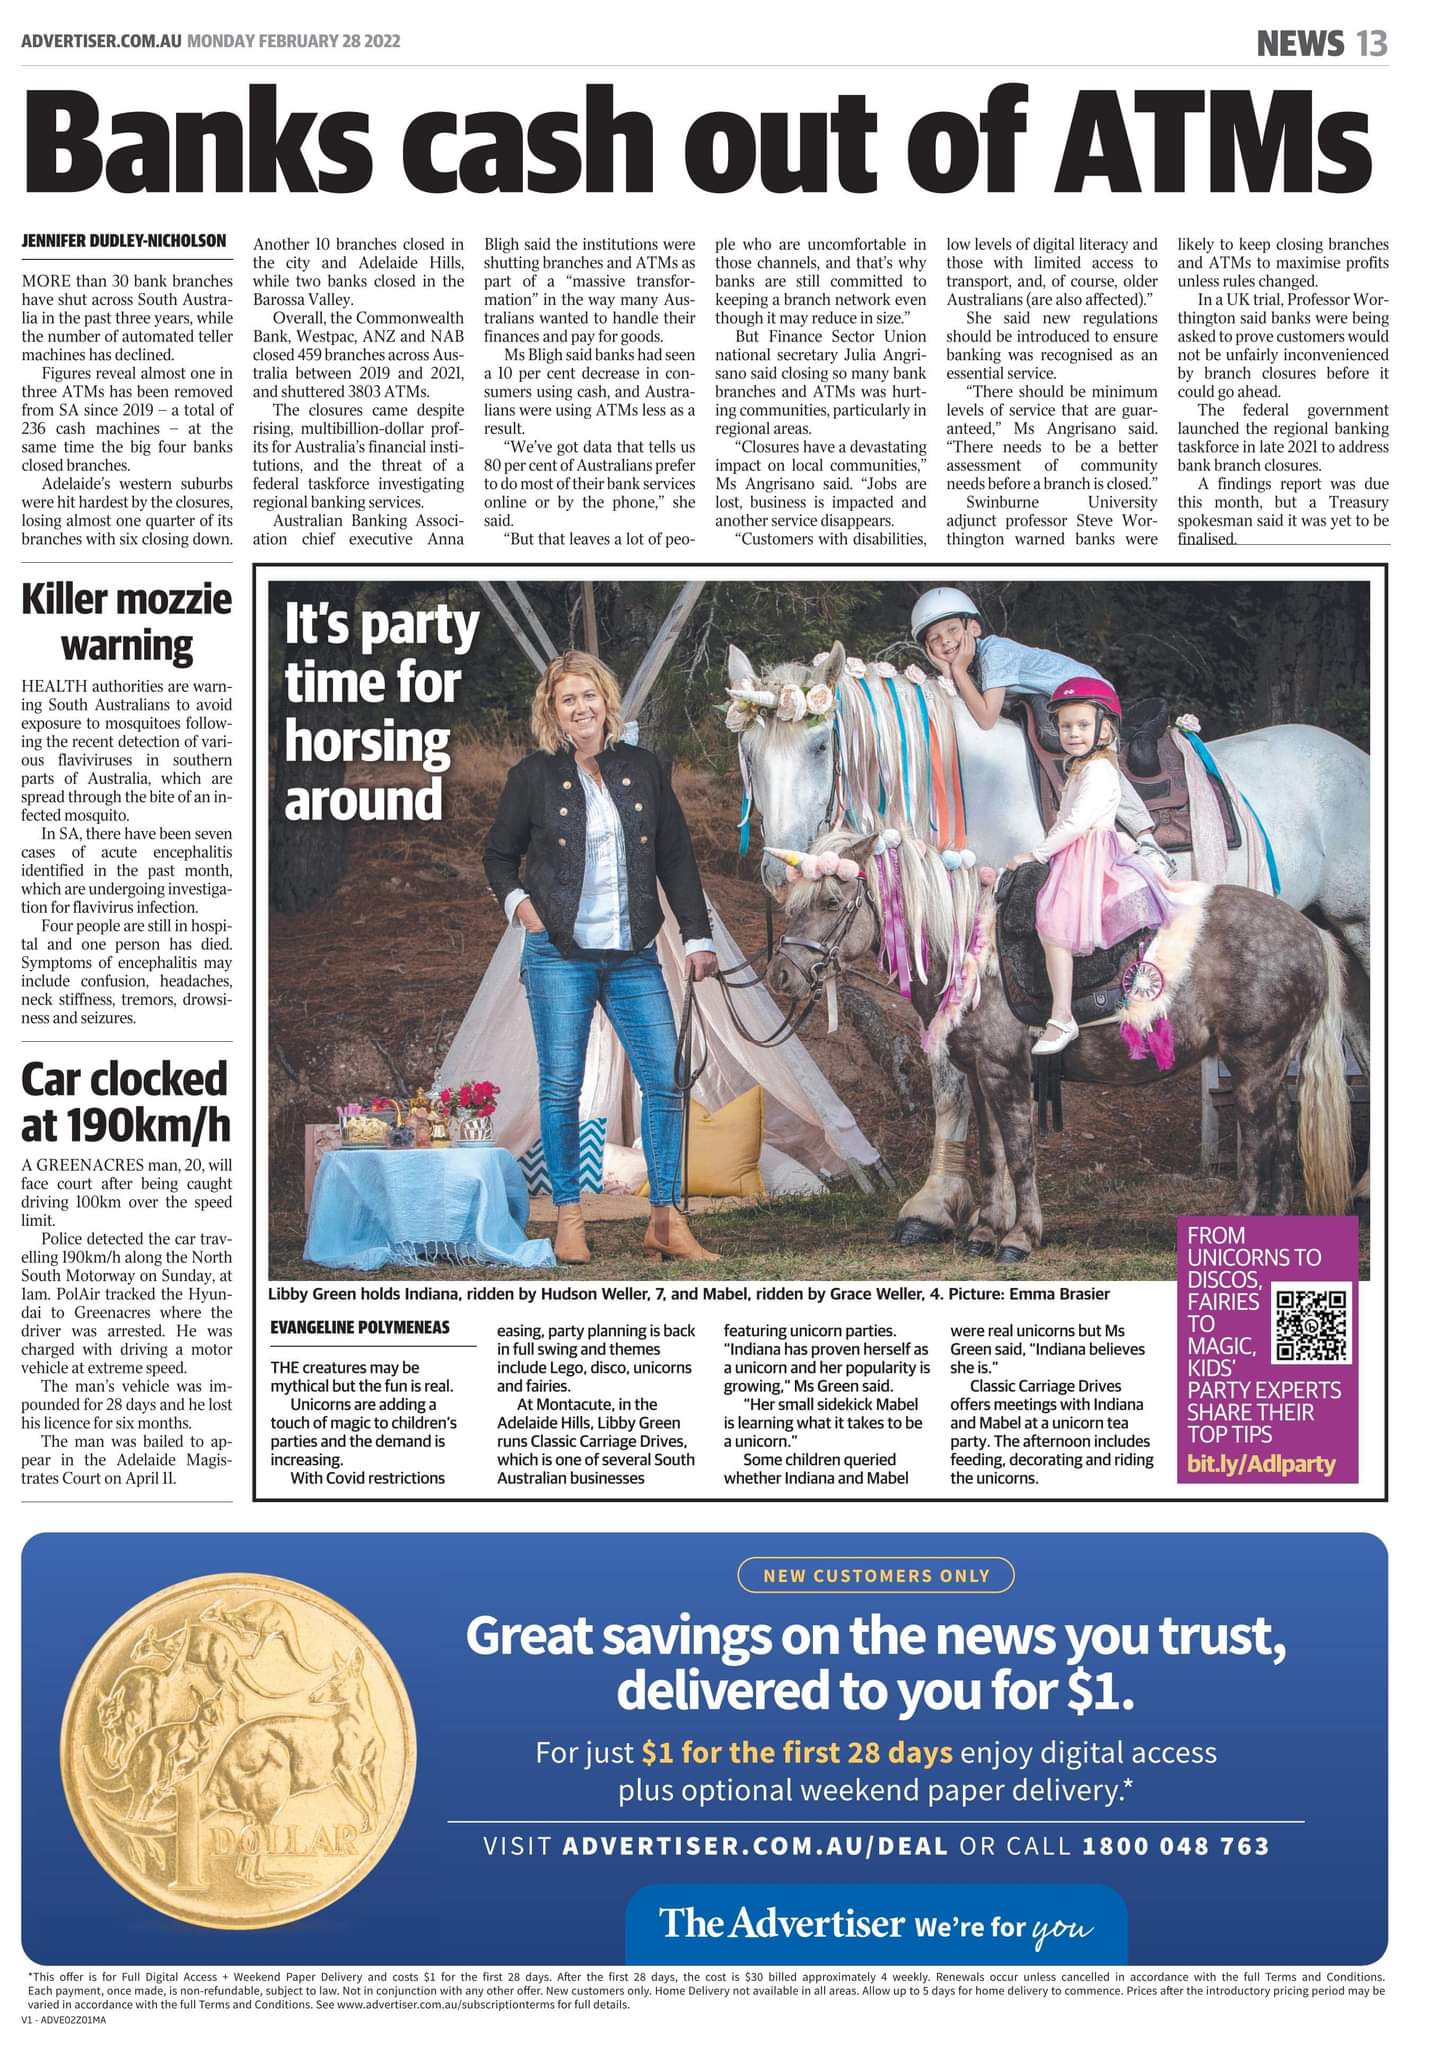 Classic Carriage Drives featured in the Advertiser